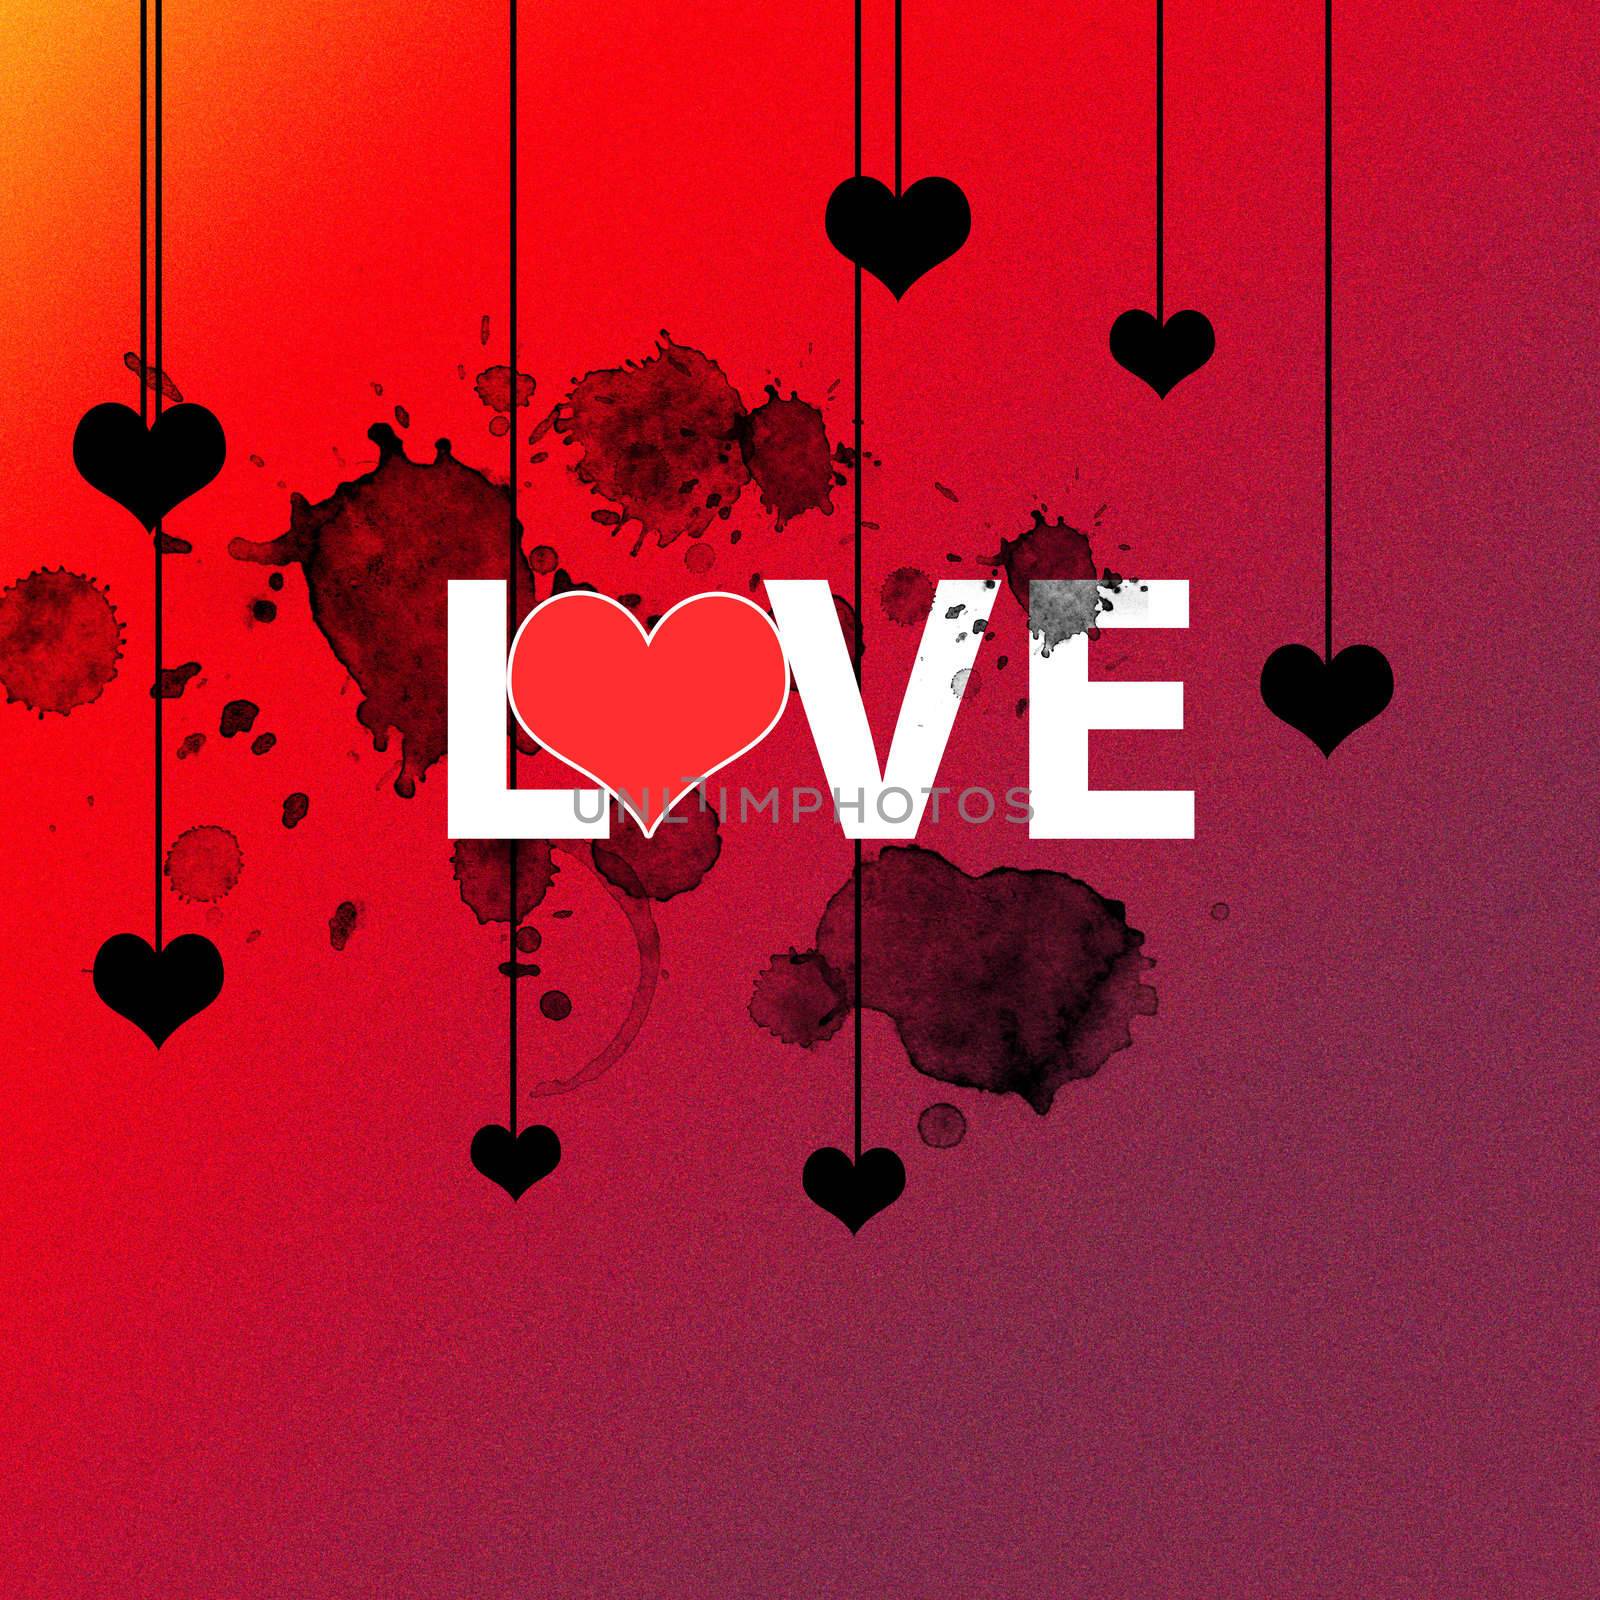 Love with hearts splatters and gradient background.